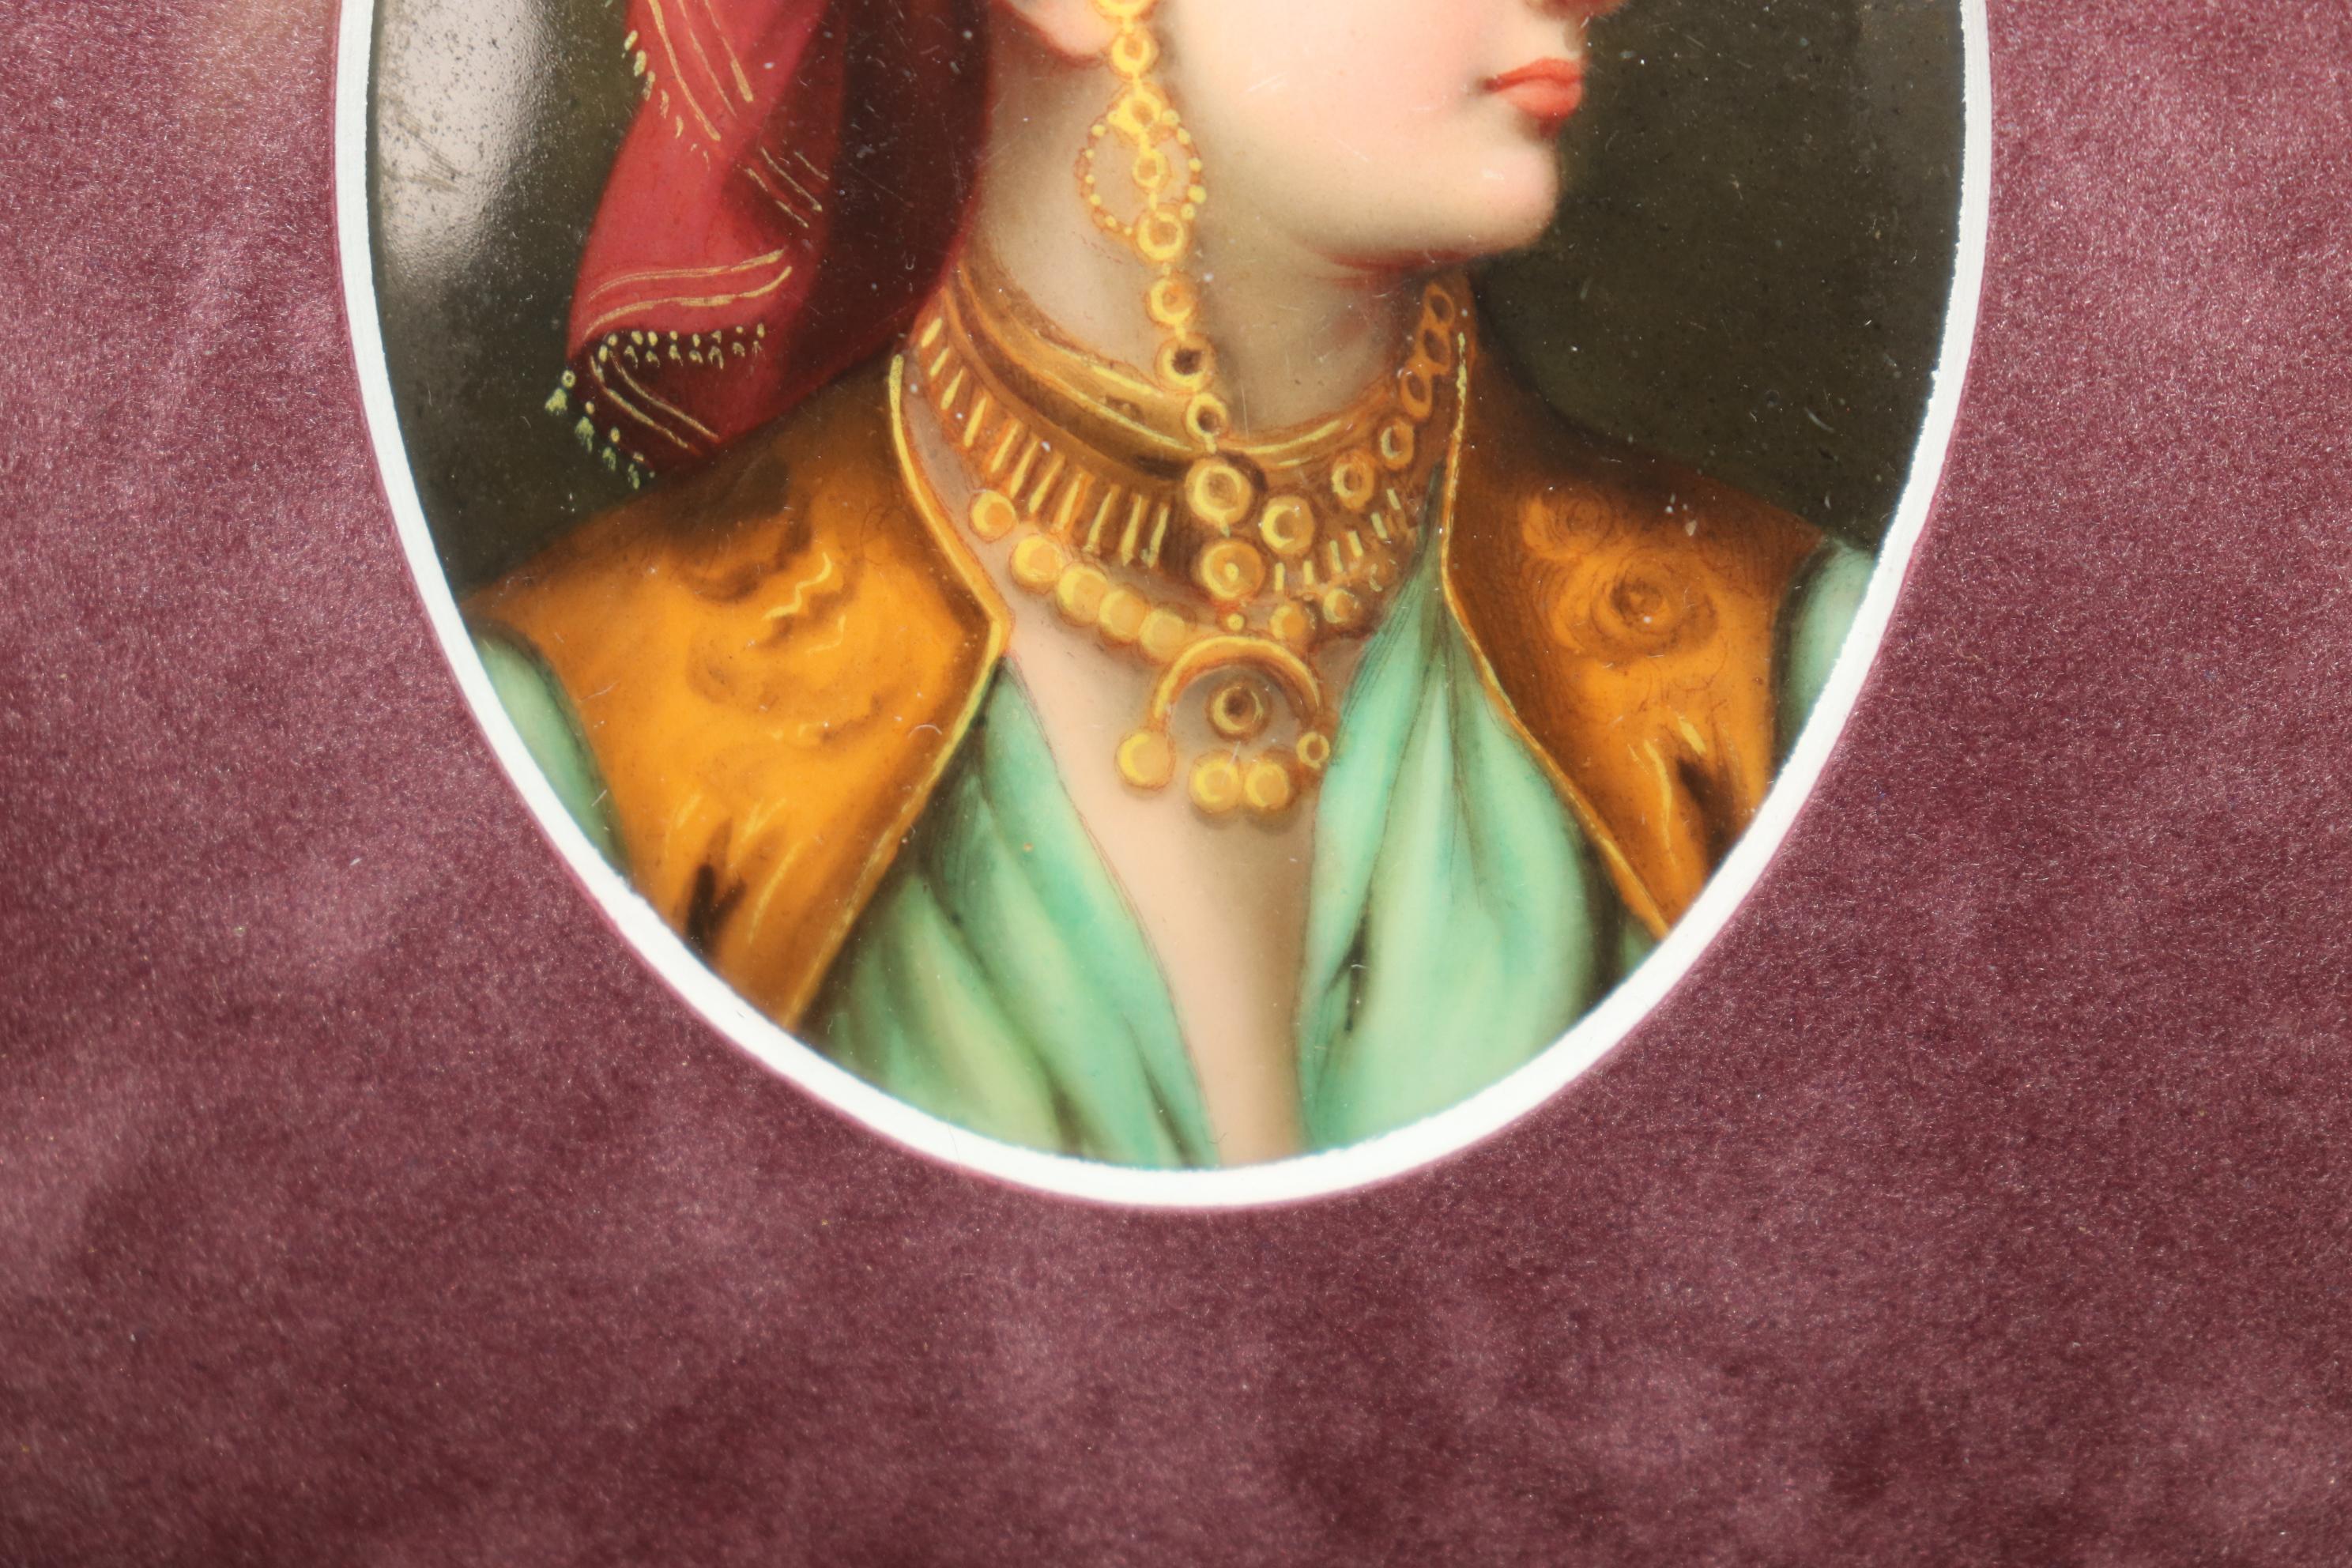 Antique 19th Century Framed German Hand Painted Porcelain Plaque of a Gypsey In Good Condition For Sale In Swedesboro, NJ